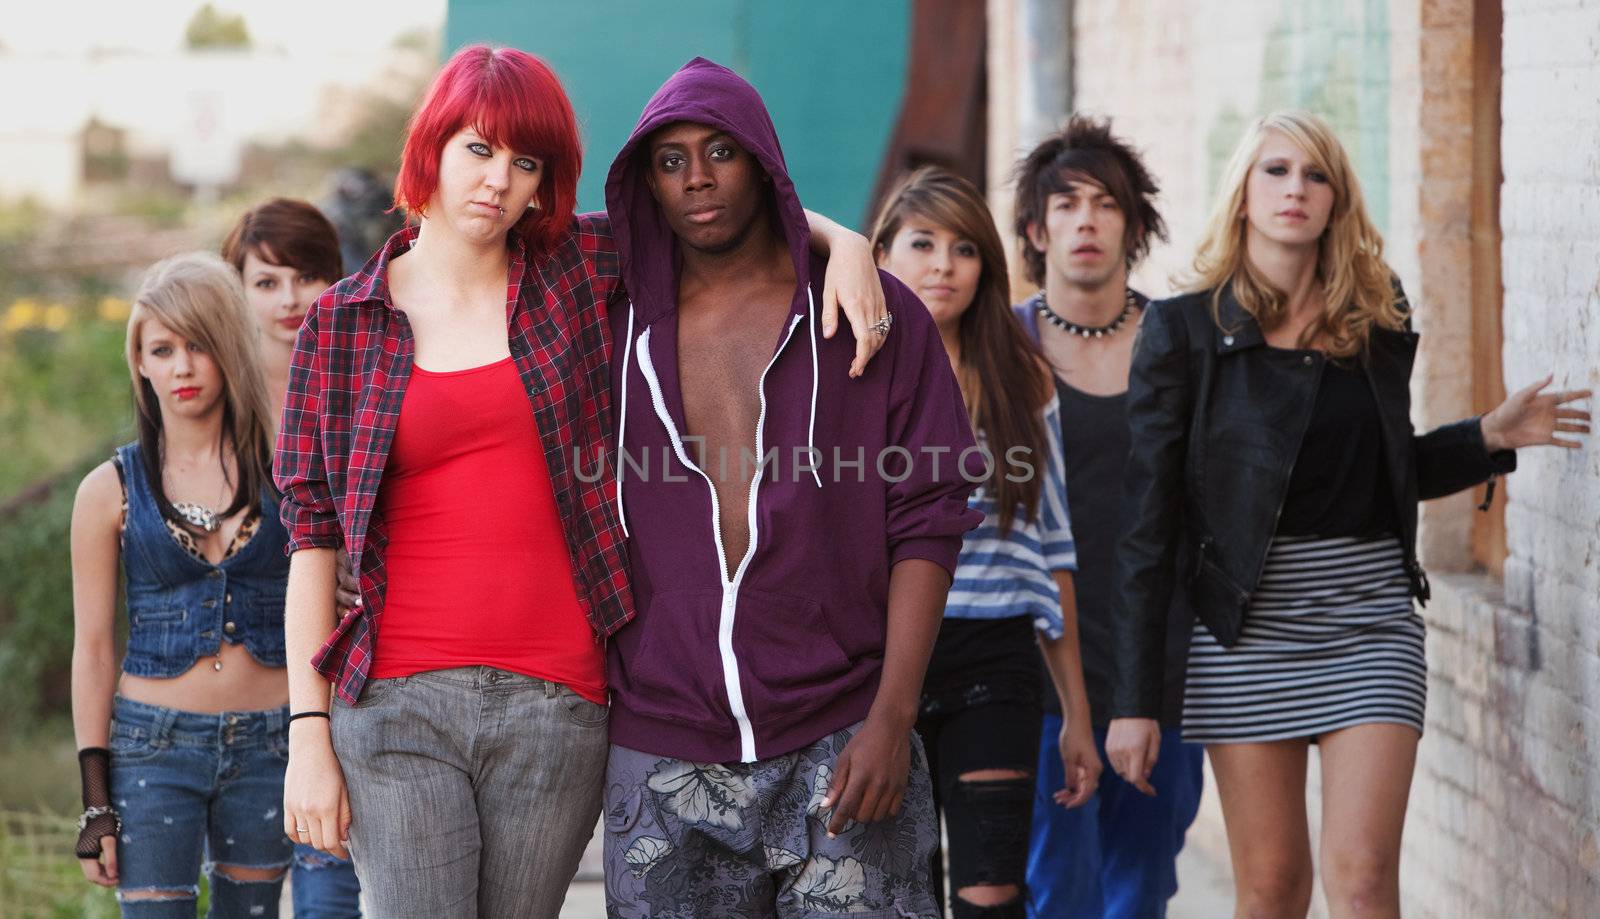 A pair of young punk teens pose together as their friends stay in the background.